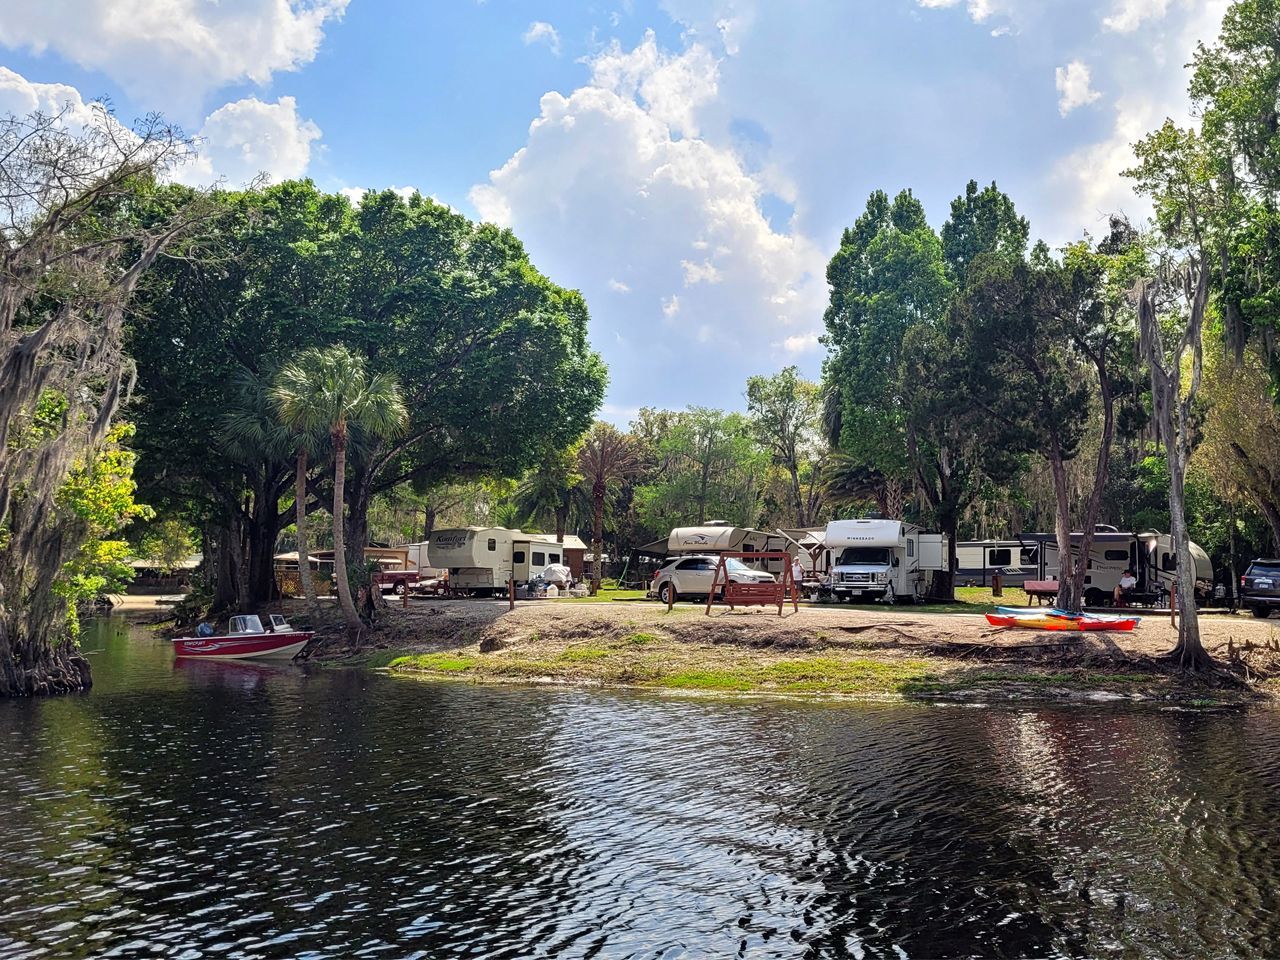 a row of rvs are parked next to a body of water .